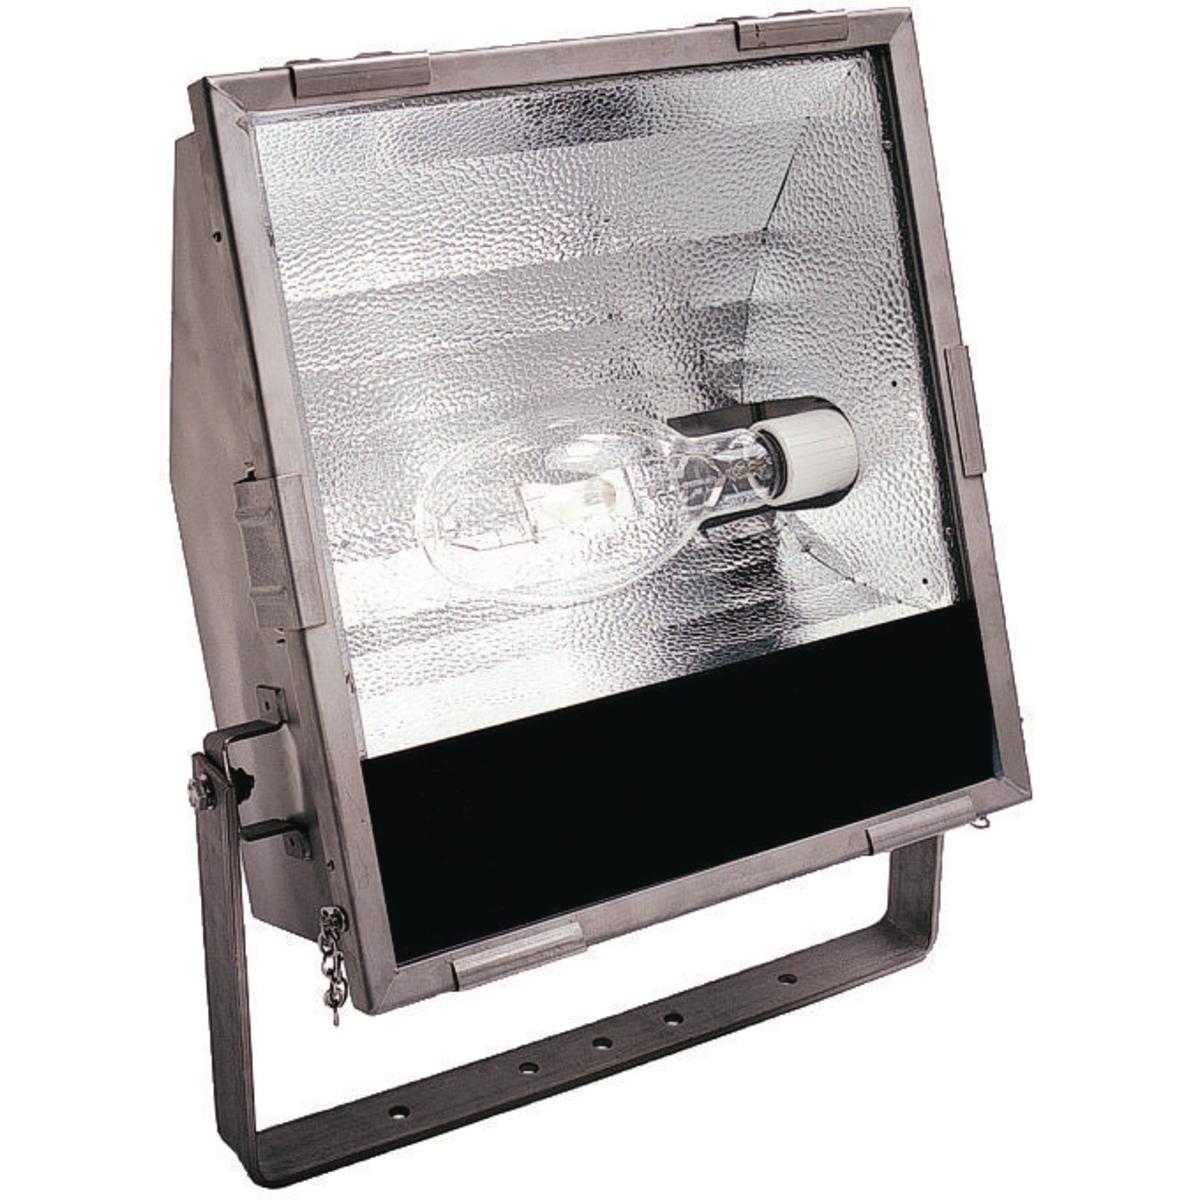 Hubbell KFS406SS KF Series - Stainless Steel 400 Watt High Pressure Sodium Marine Floodlight (Lamp Not Included) - 120/277/347V At 60Hz  ; Type 316 Stainless Steel Housing. 16-gauge housing ensures low corrosion and long life, reducing maintenance costs ; Rugged quick-rel